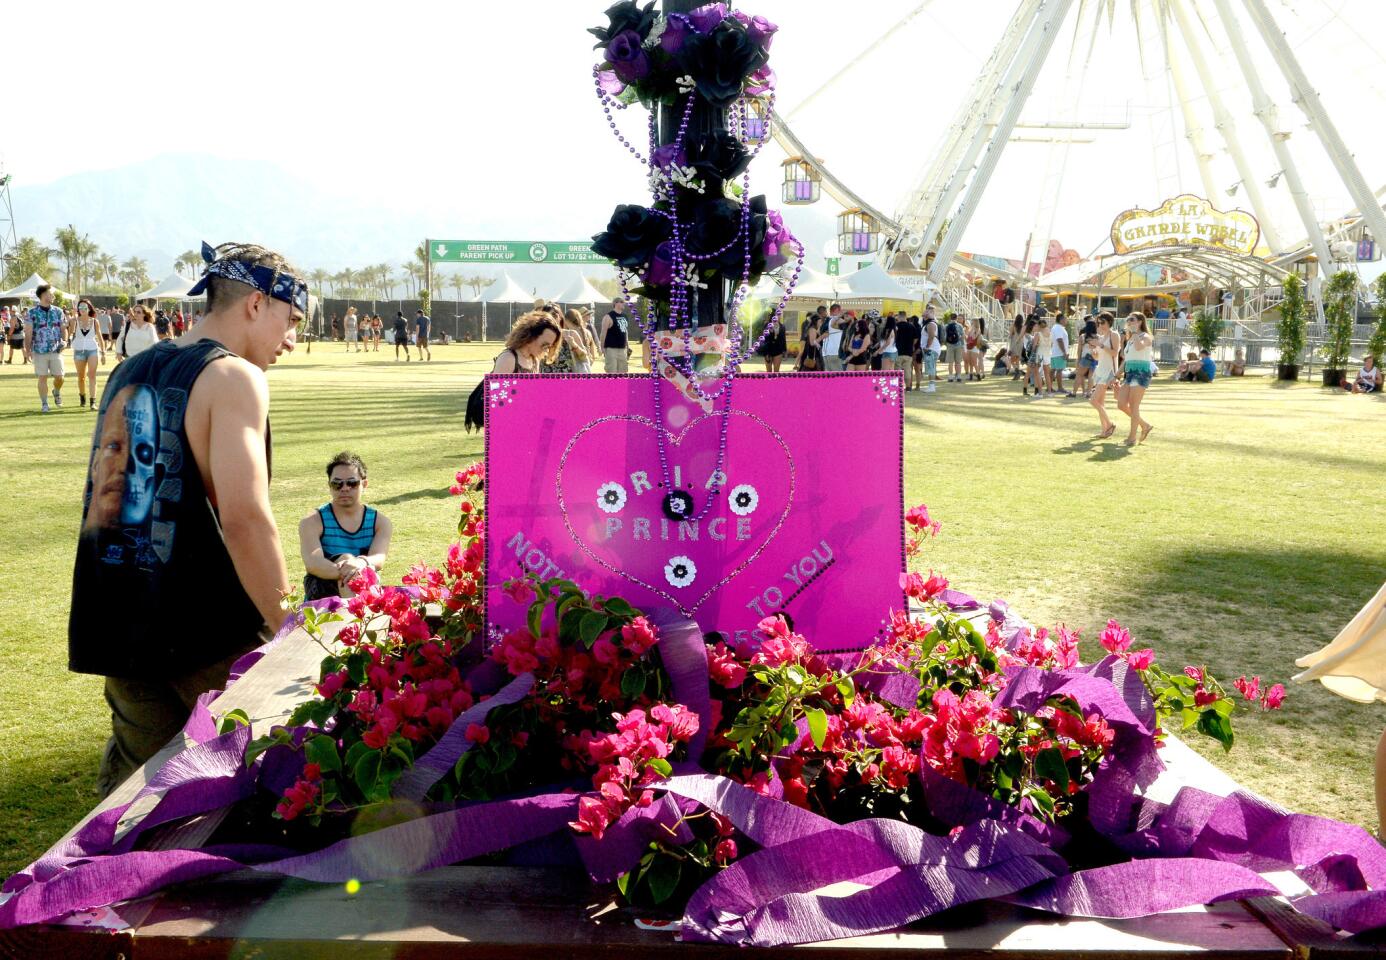 A memorial to Prince is seen during the first day of Weekend 2 at the 2016 Coachella Valley Music and Arts Festival in Indio.